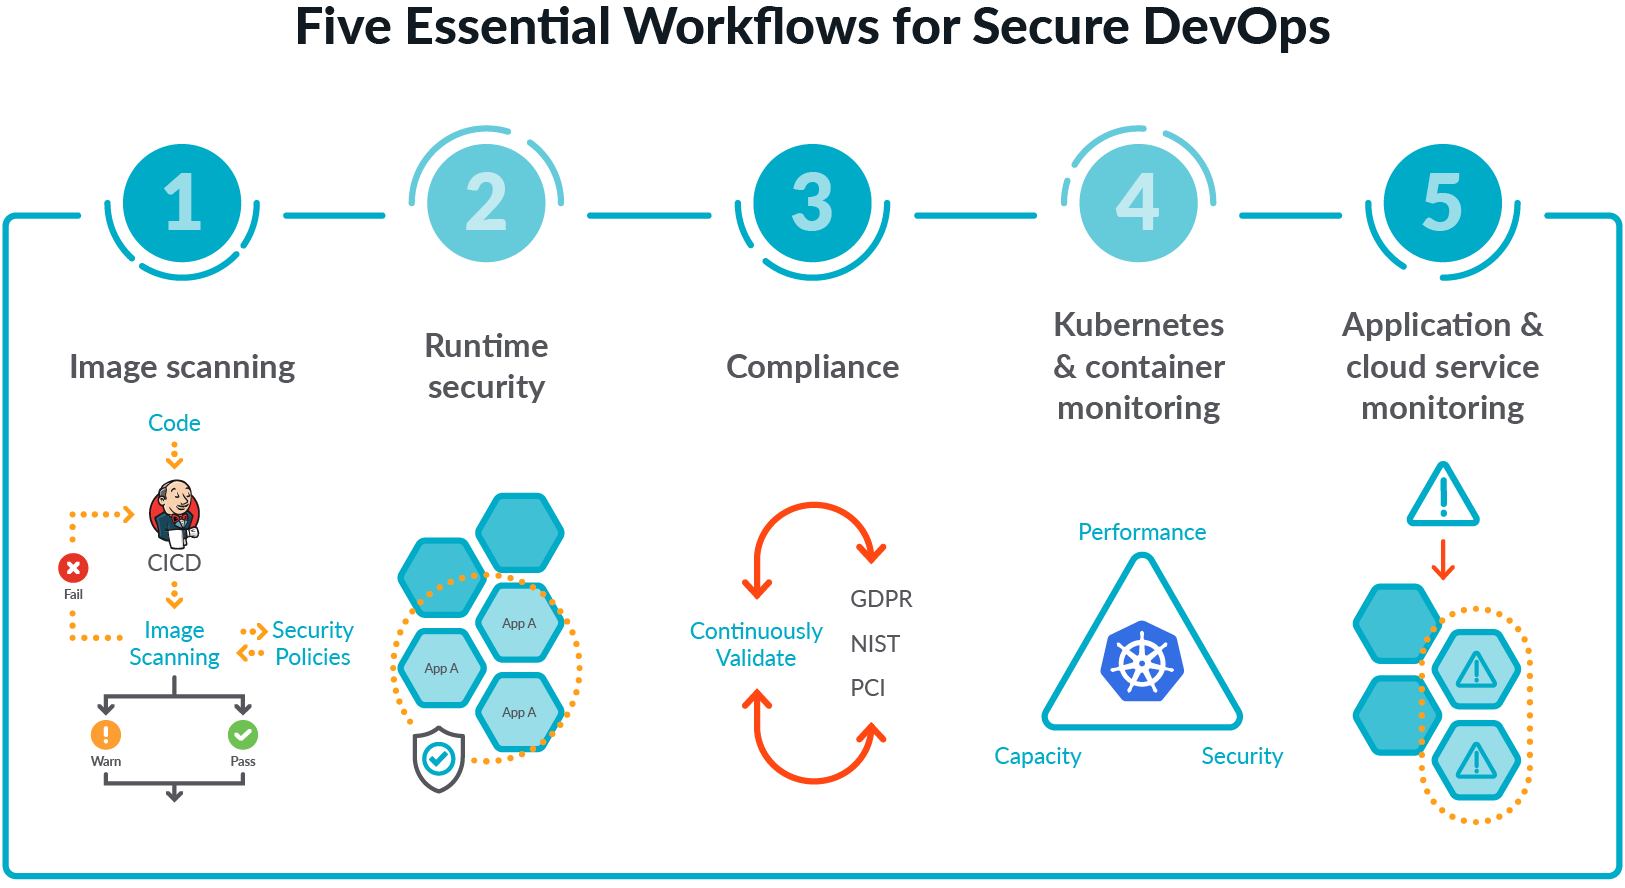 The five essential workflows for Secure DevOps are image scanning, runtime securiy, compliance, Kubernetes & container monitoring, and application and cloud services monitoring.